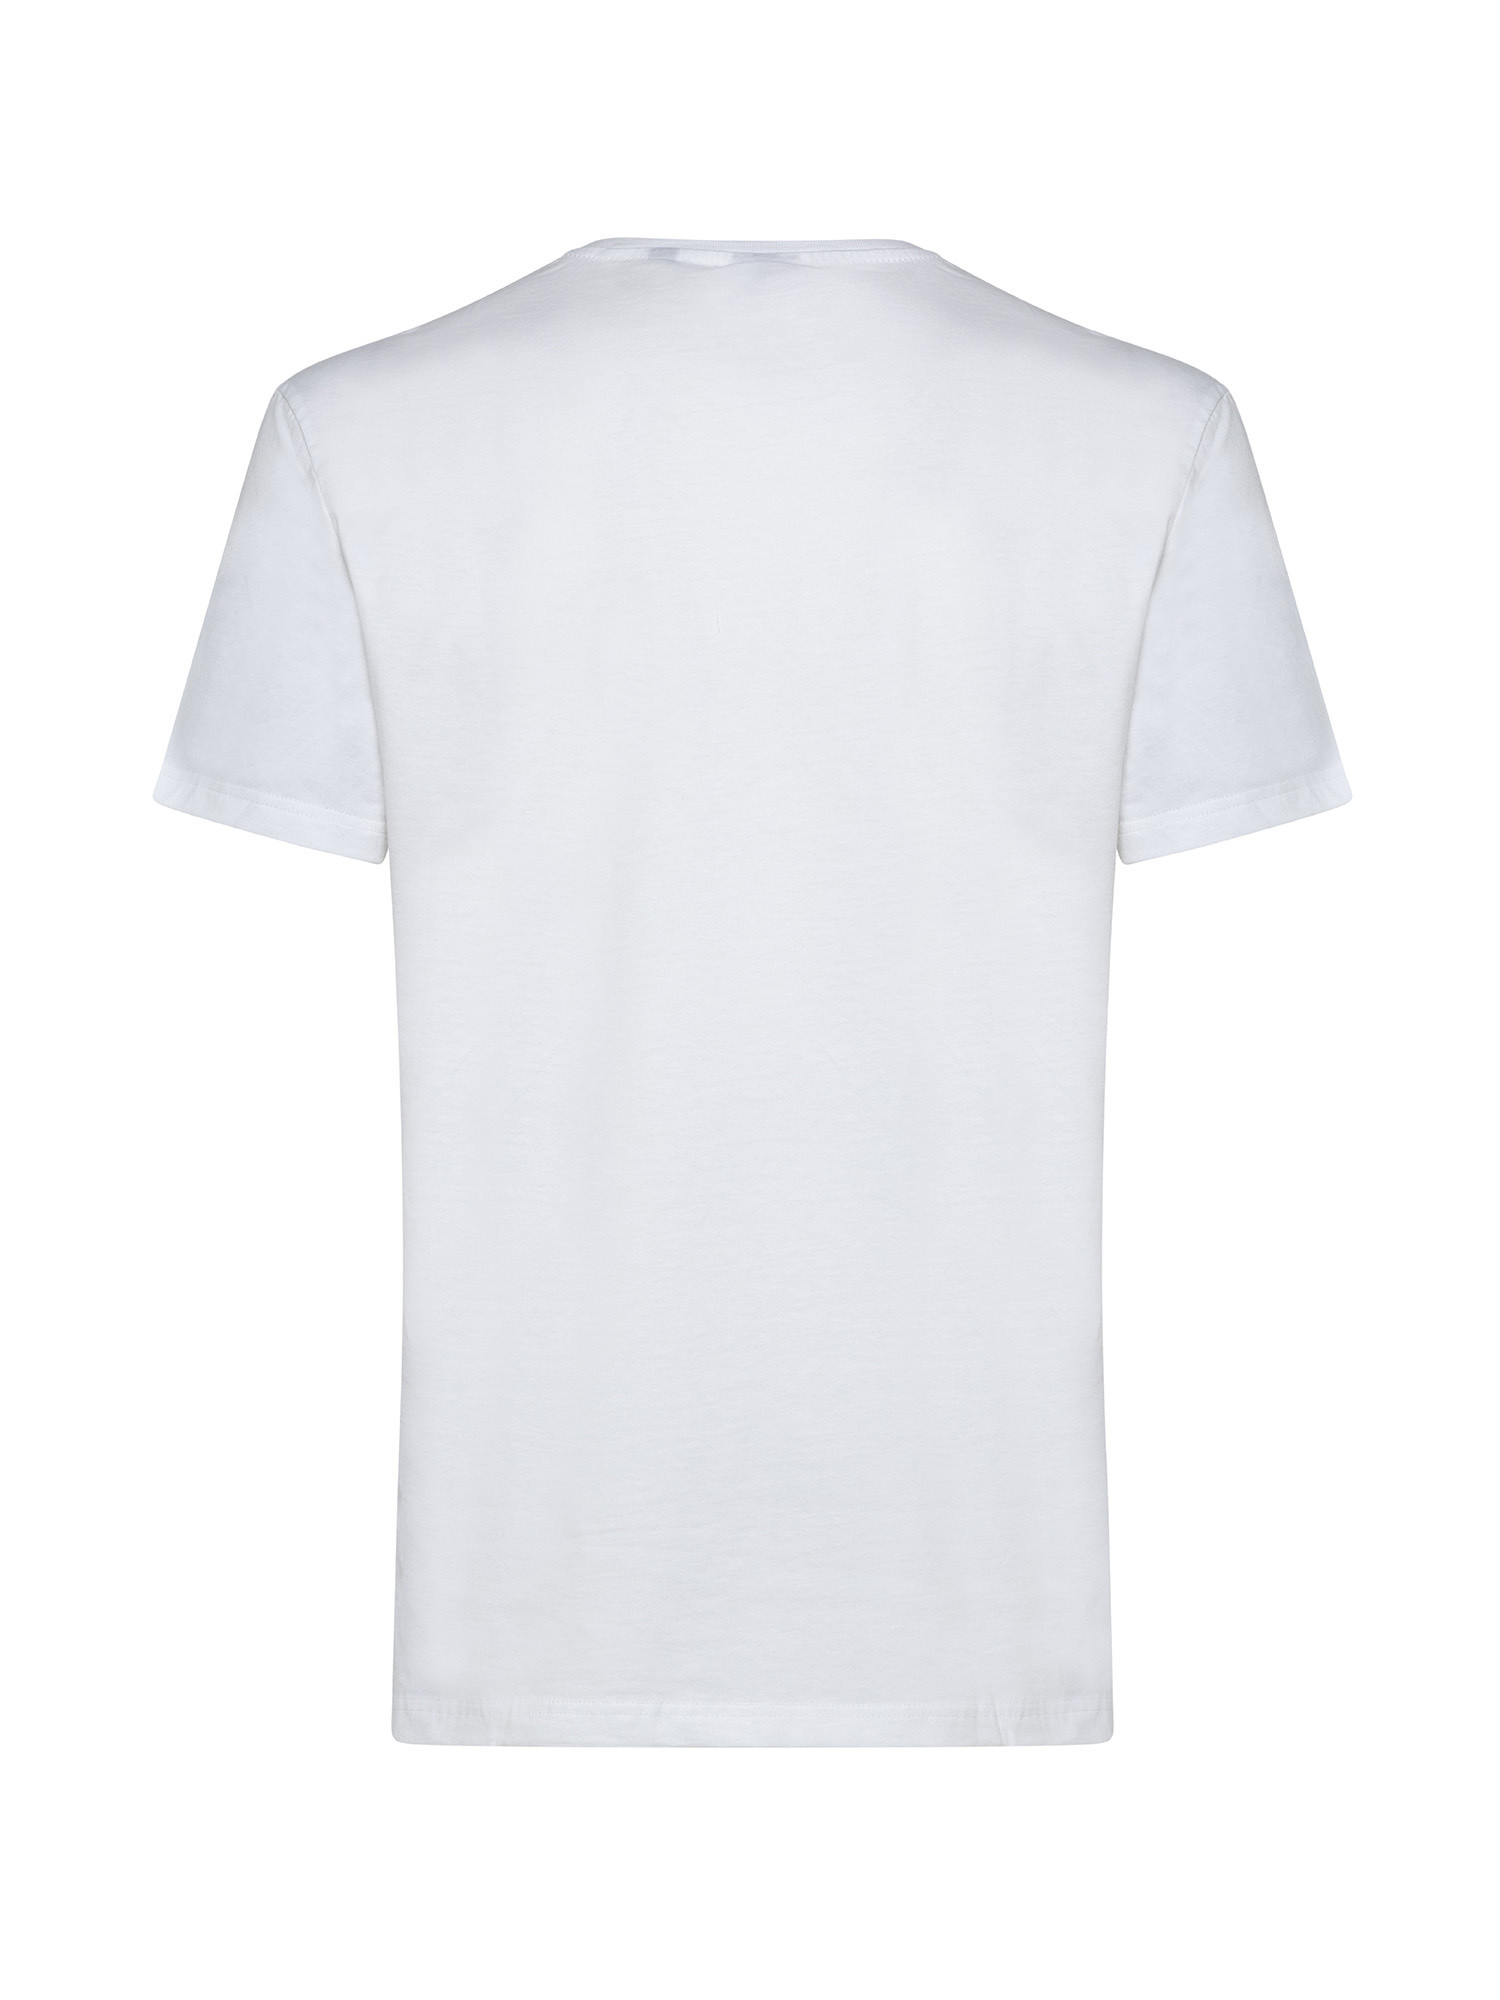 G-Star - T-shirt with print, White, large image number 1